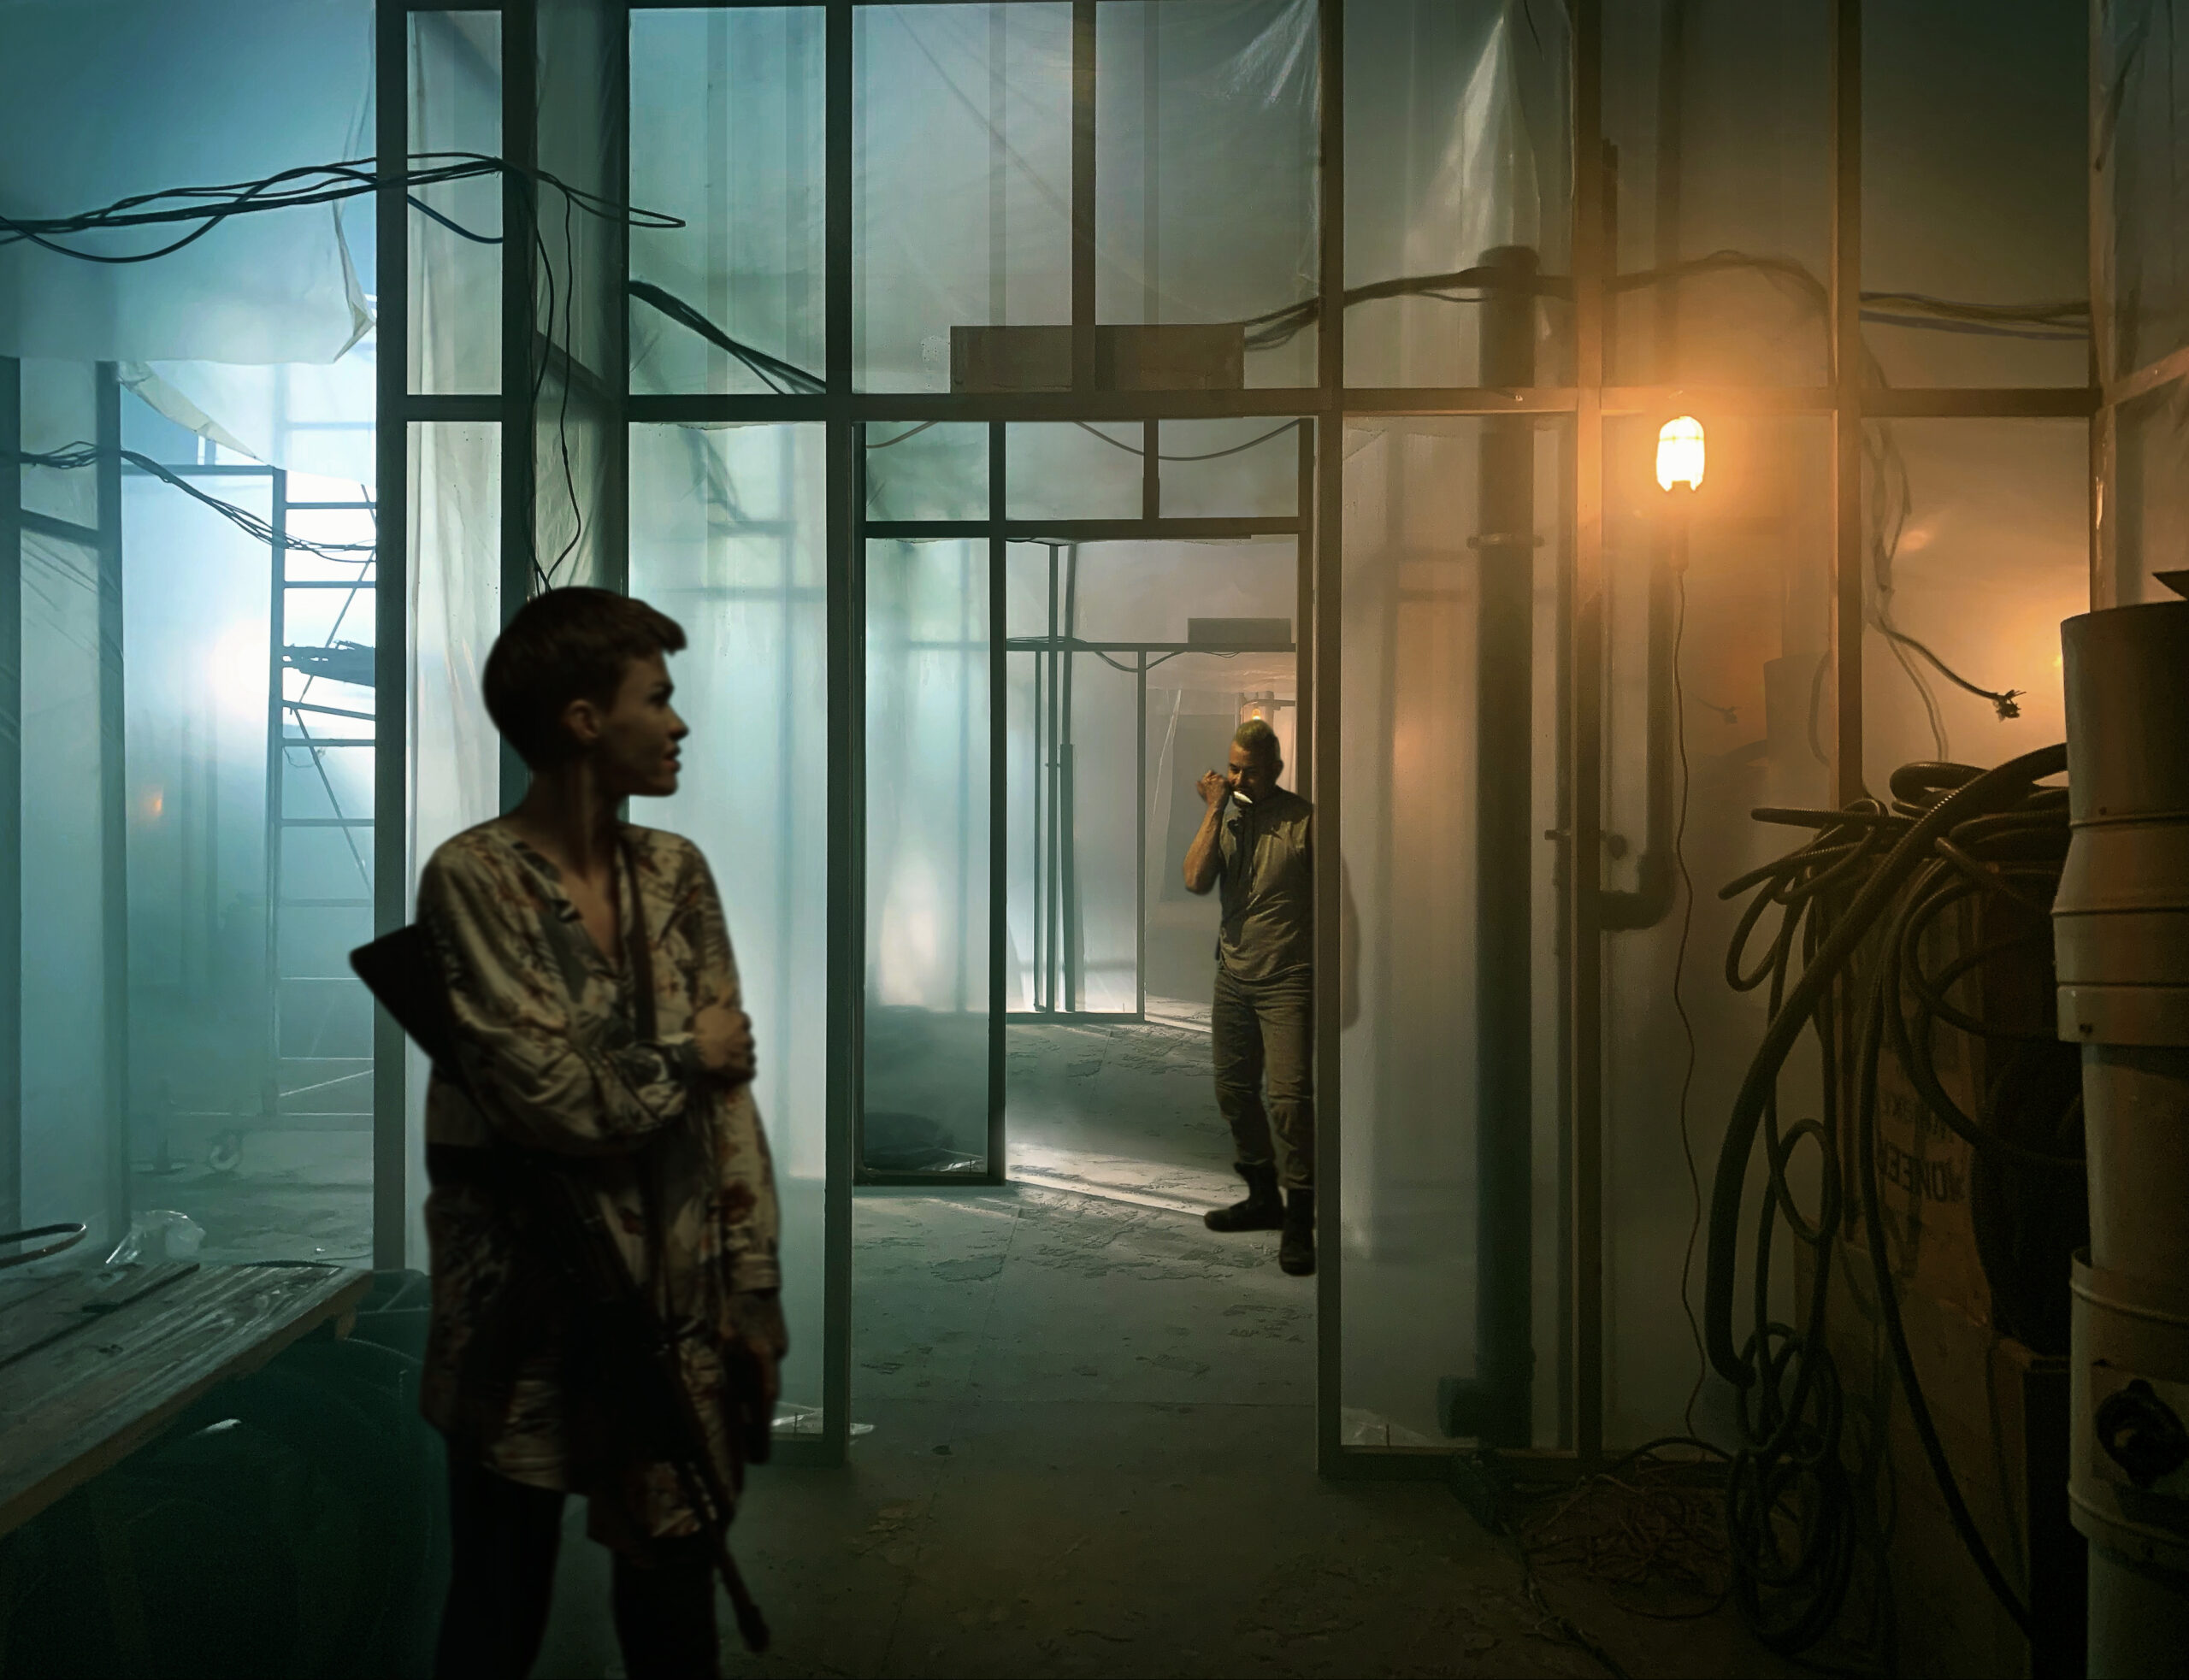 THE DOORMAN - Directed by Ryuhei Kitamura - Production Design by Luca Tranchino - Plastic Room - ©2020 - Lionsgate